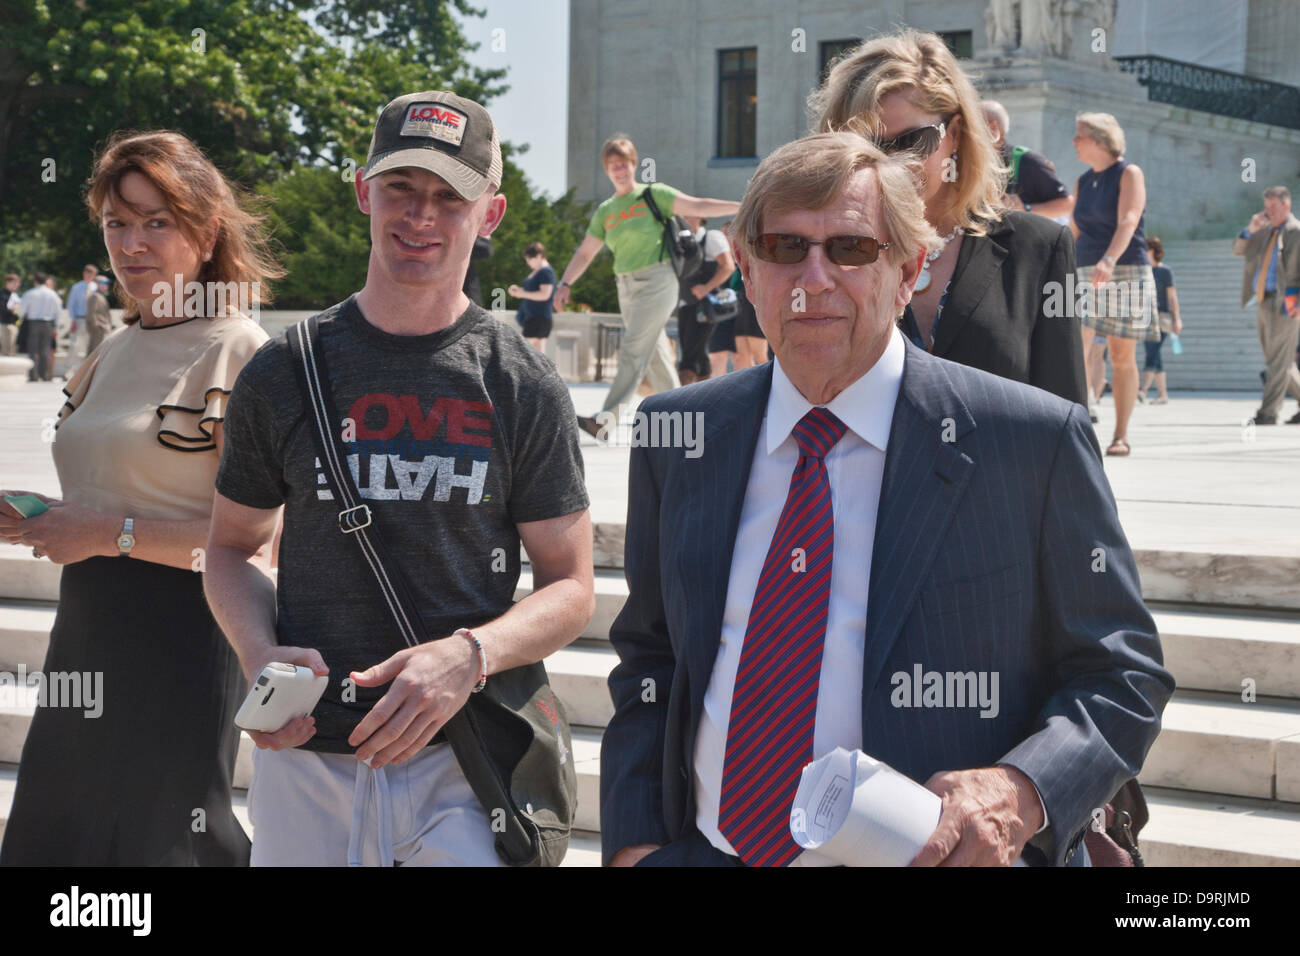 Washington DC, USA. 25th June 2013. Ted Olson lead plaintiff attorney for Hollingsworth v. Perry to overturn Proposition 8 leaves the US Supreme Court on Tuesday. Photo Credit: Rudy K/Alamy Live News Stock Photo